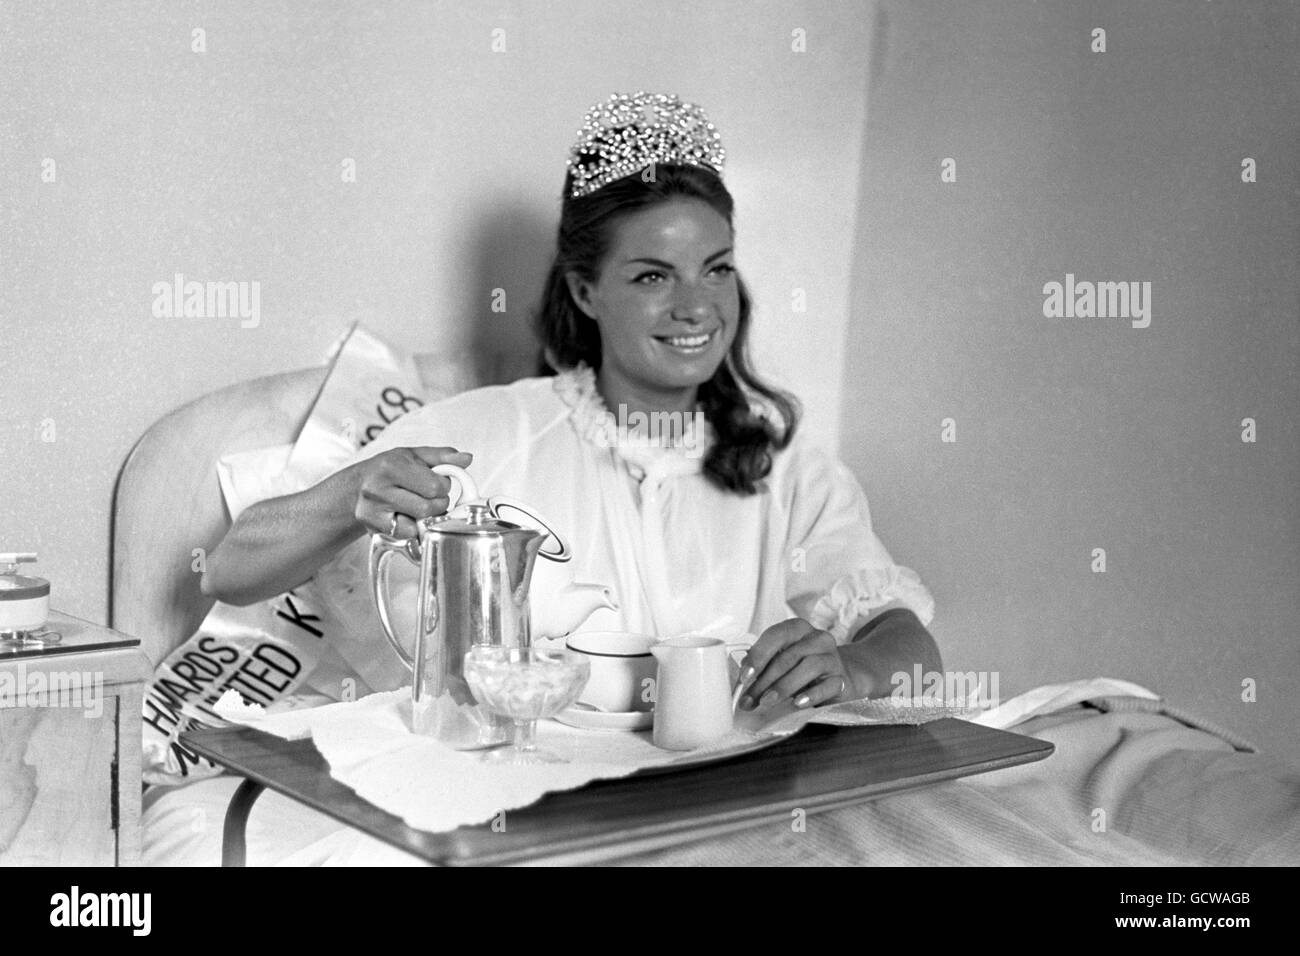 Kathleen Winstanley, who won the title of Miss United Kingdom, in her hotel room in Blackpool. Stock Photo